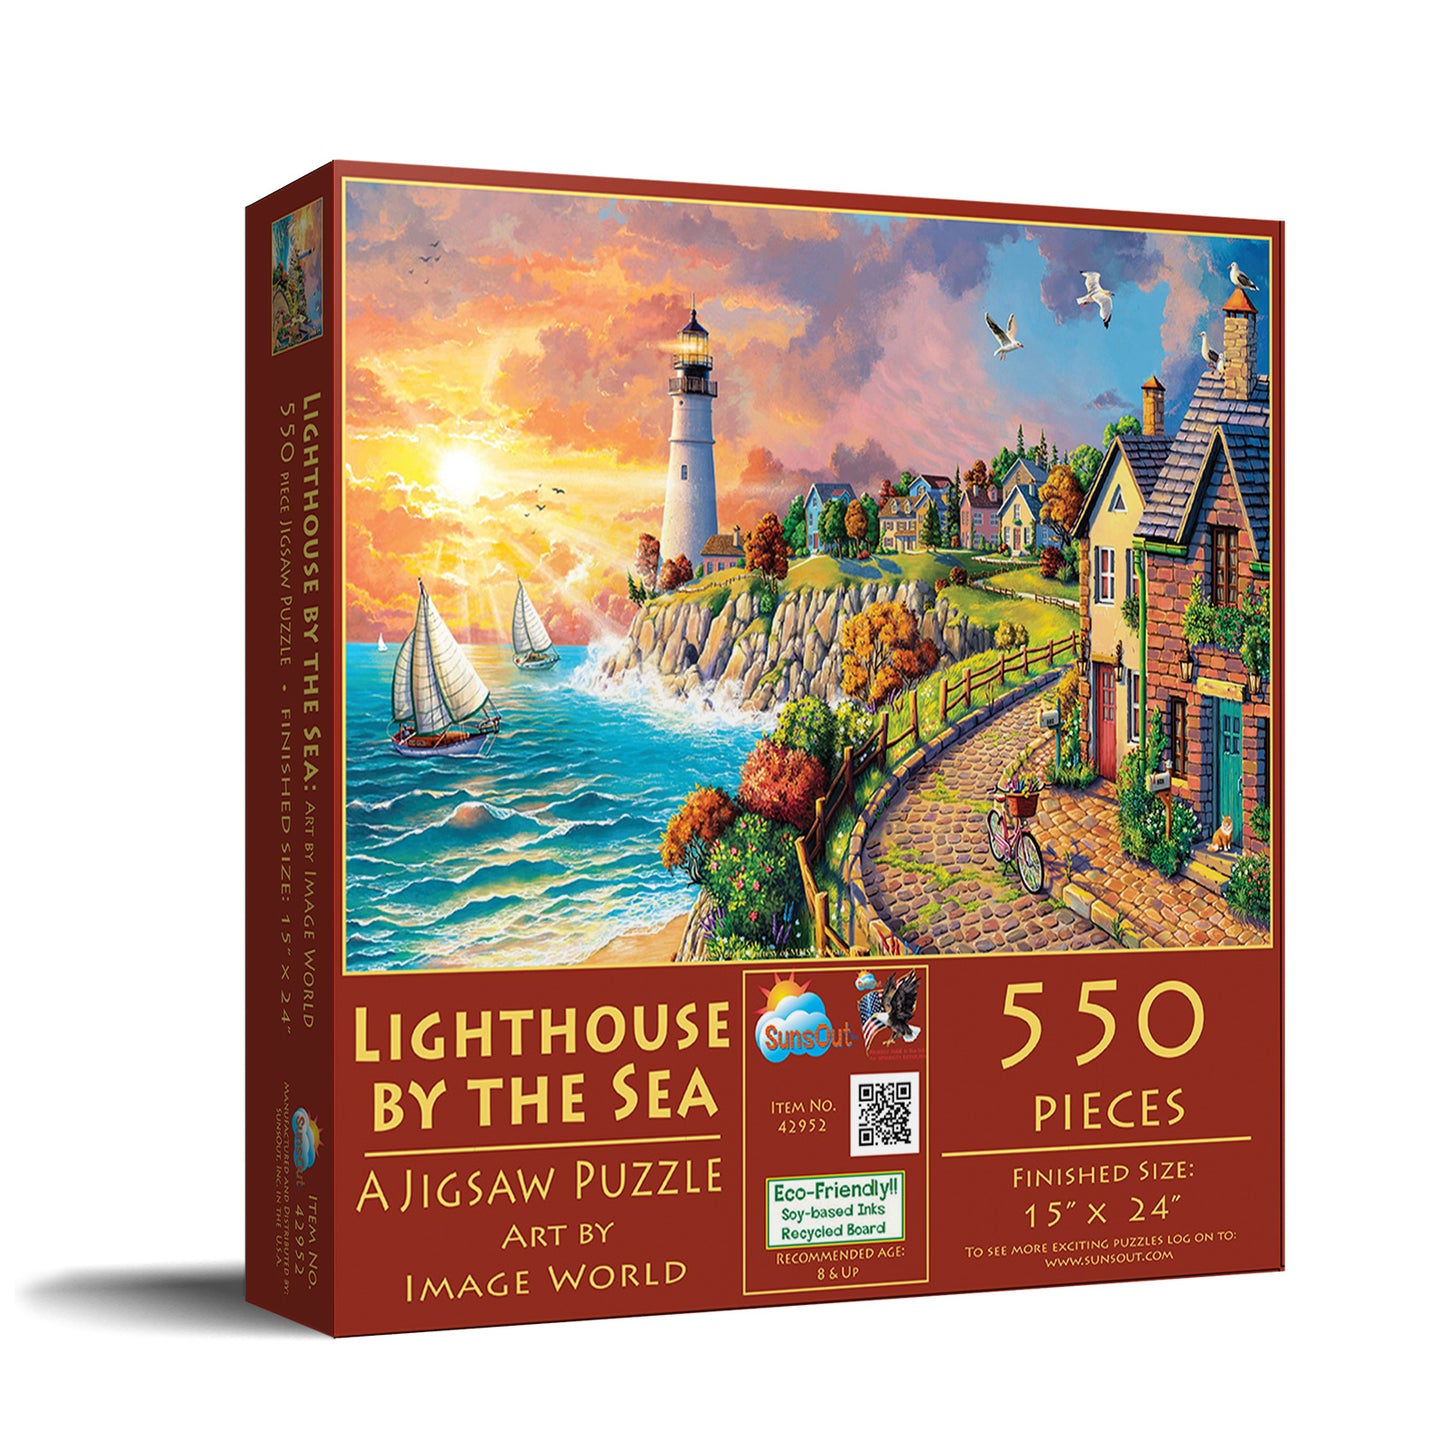 Lighthouse by the Sea - 550 Piece Jigsaw Puzzle